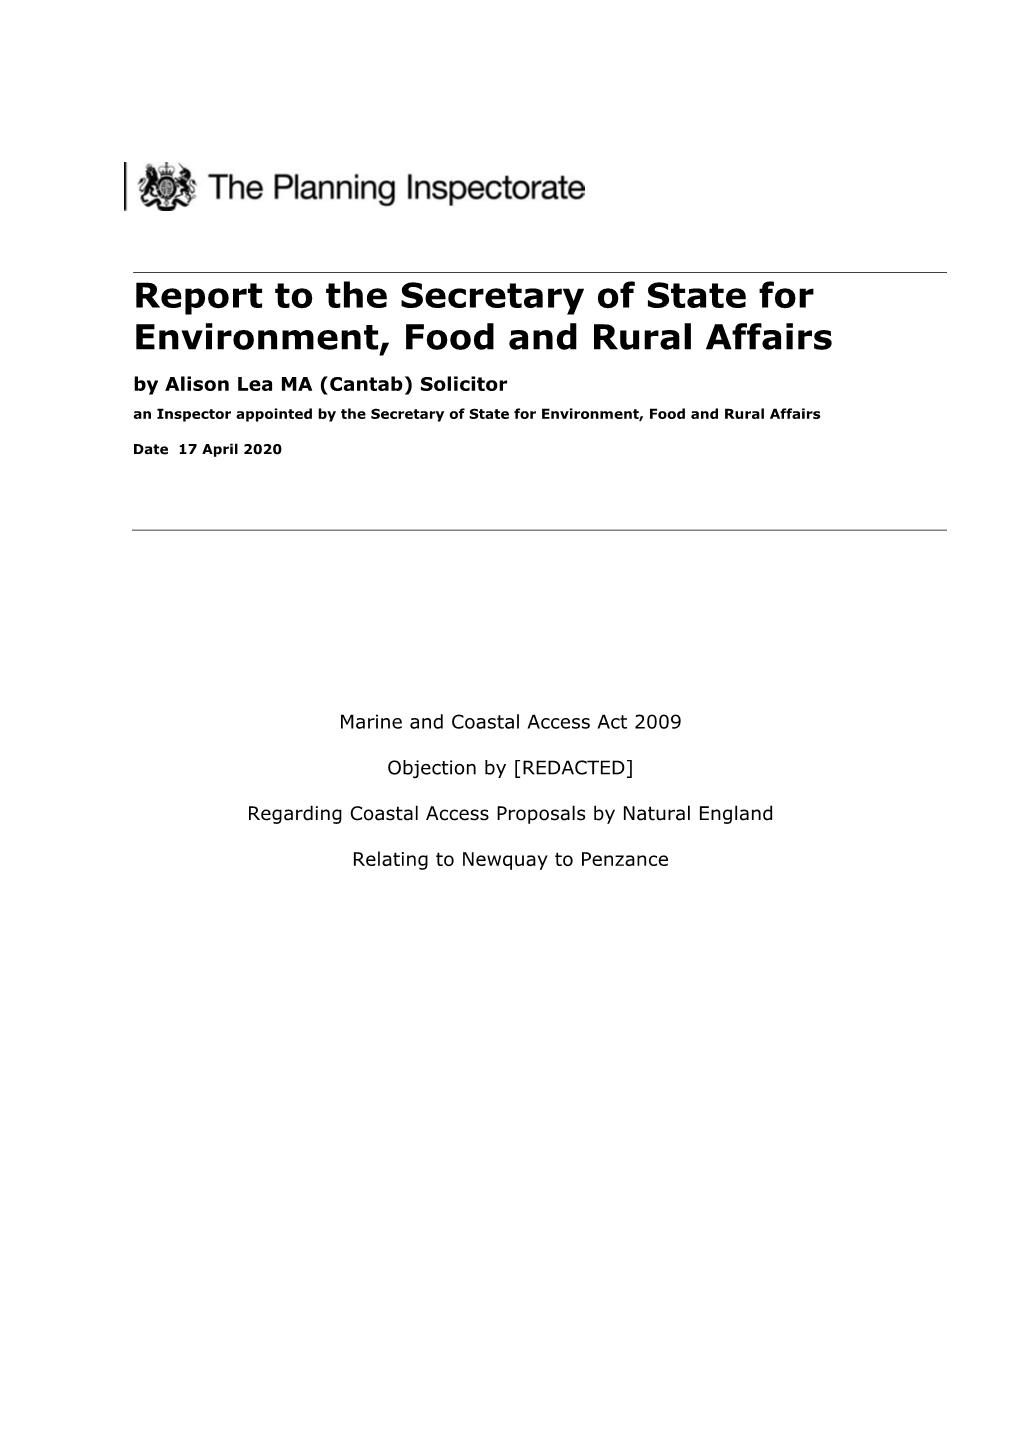 Report to the Secretary of State for Environment, Food and Rural Affairs